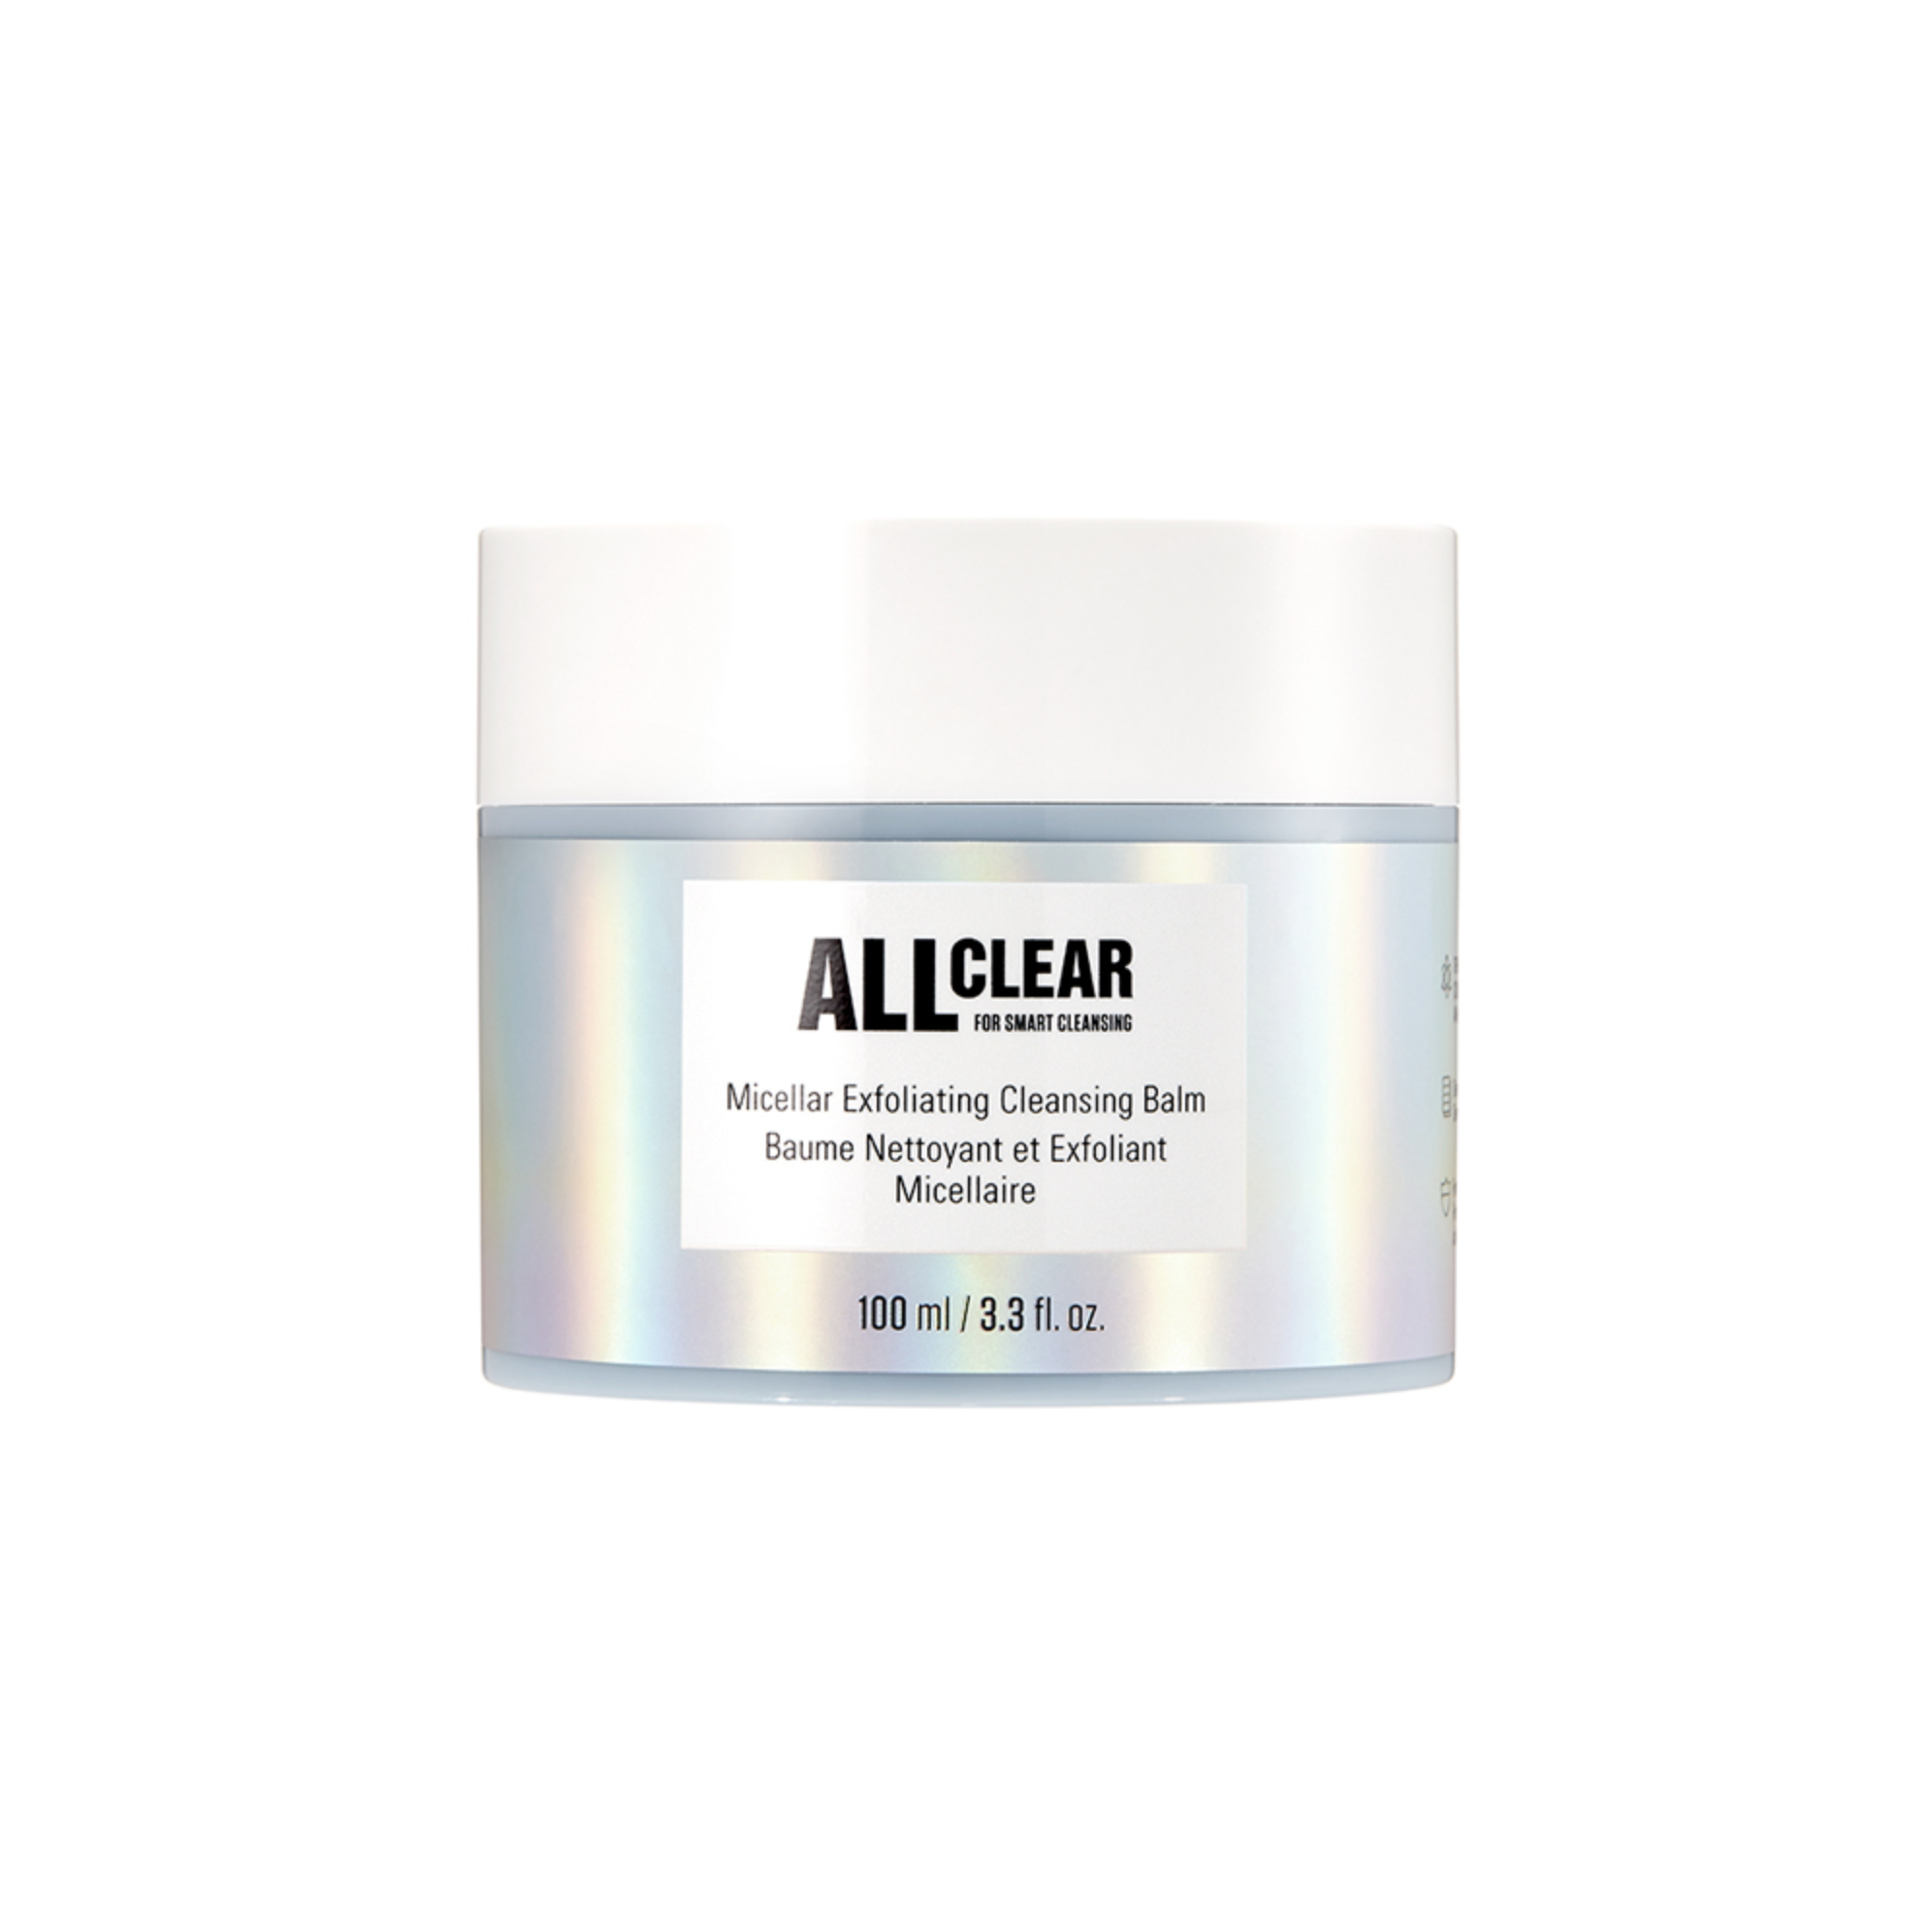 ALL CLEAR MICELLAR EXFOLIANTING CLEANSING BALM